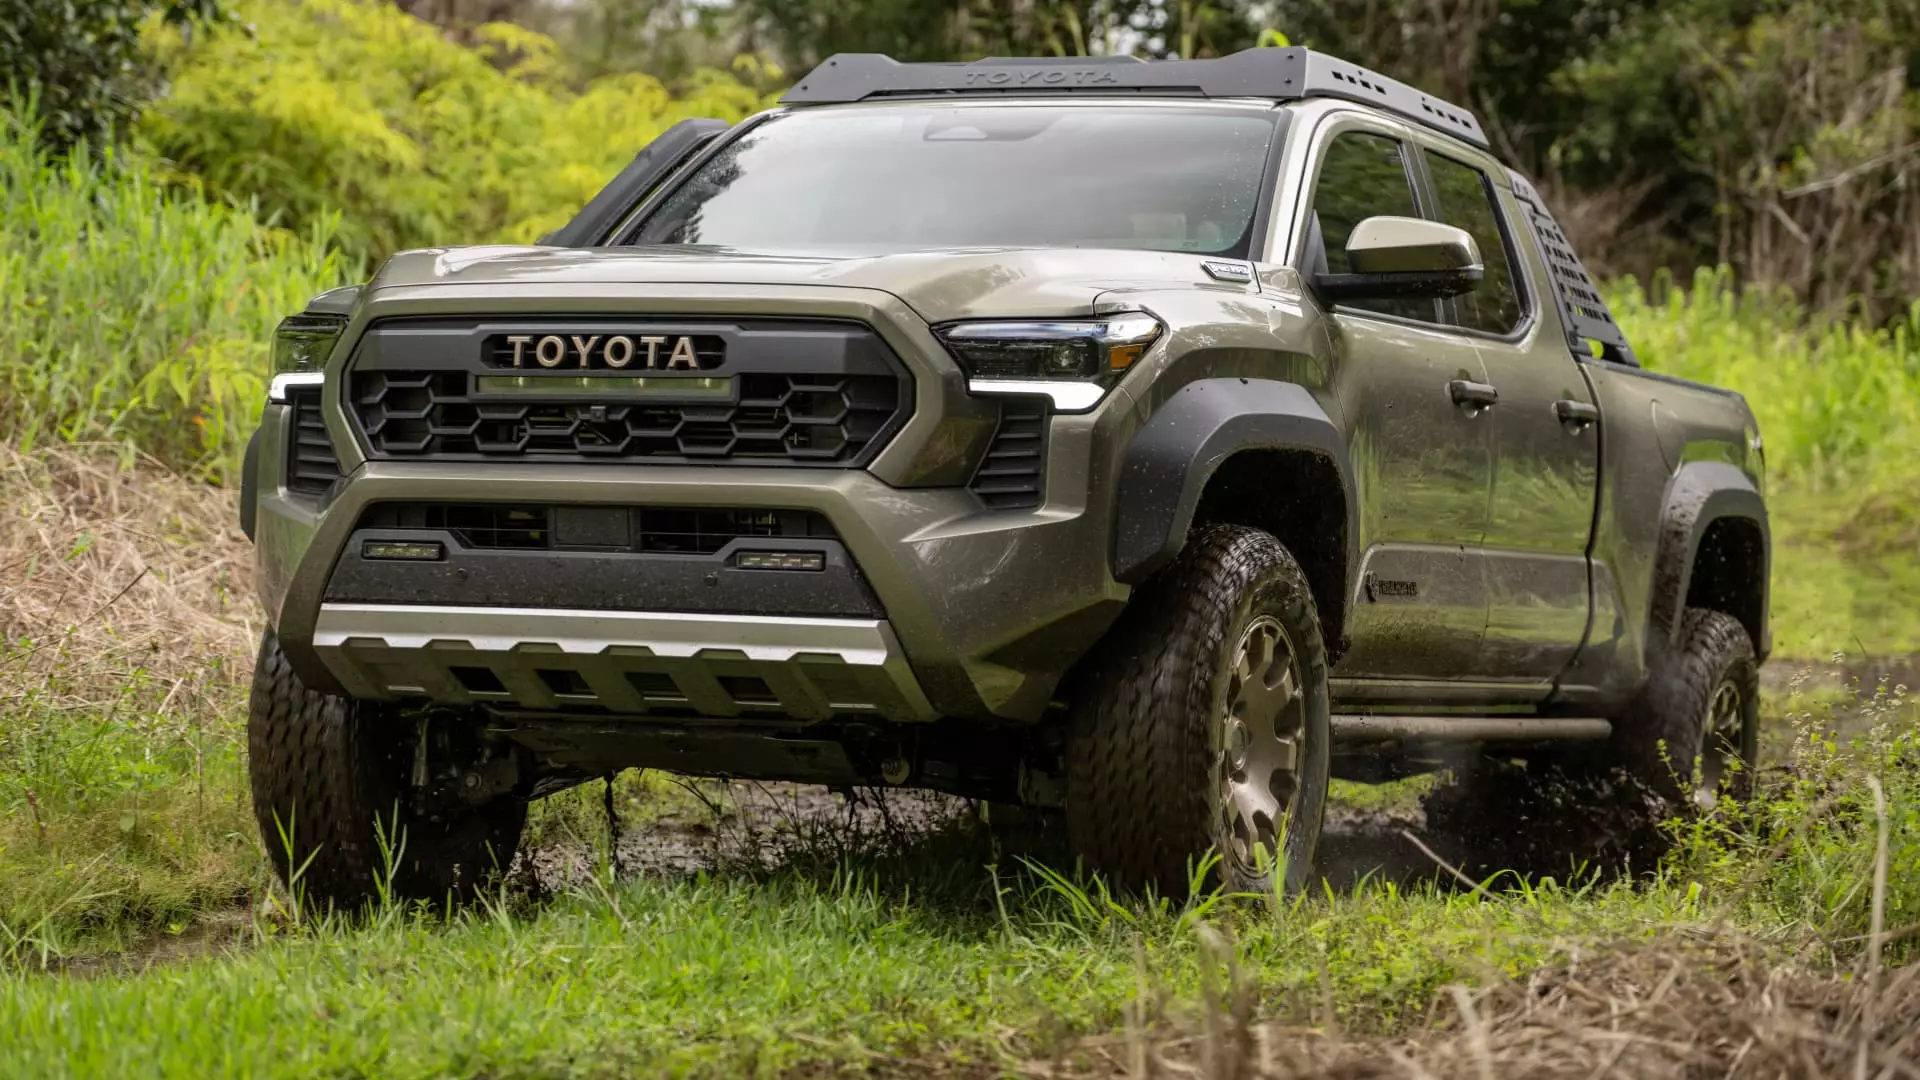 Toyota Motor Considers Expanding U.S. Truck Lineup with Electric Options